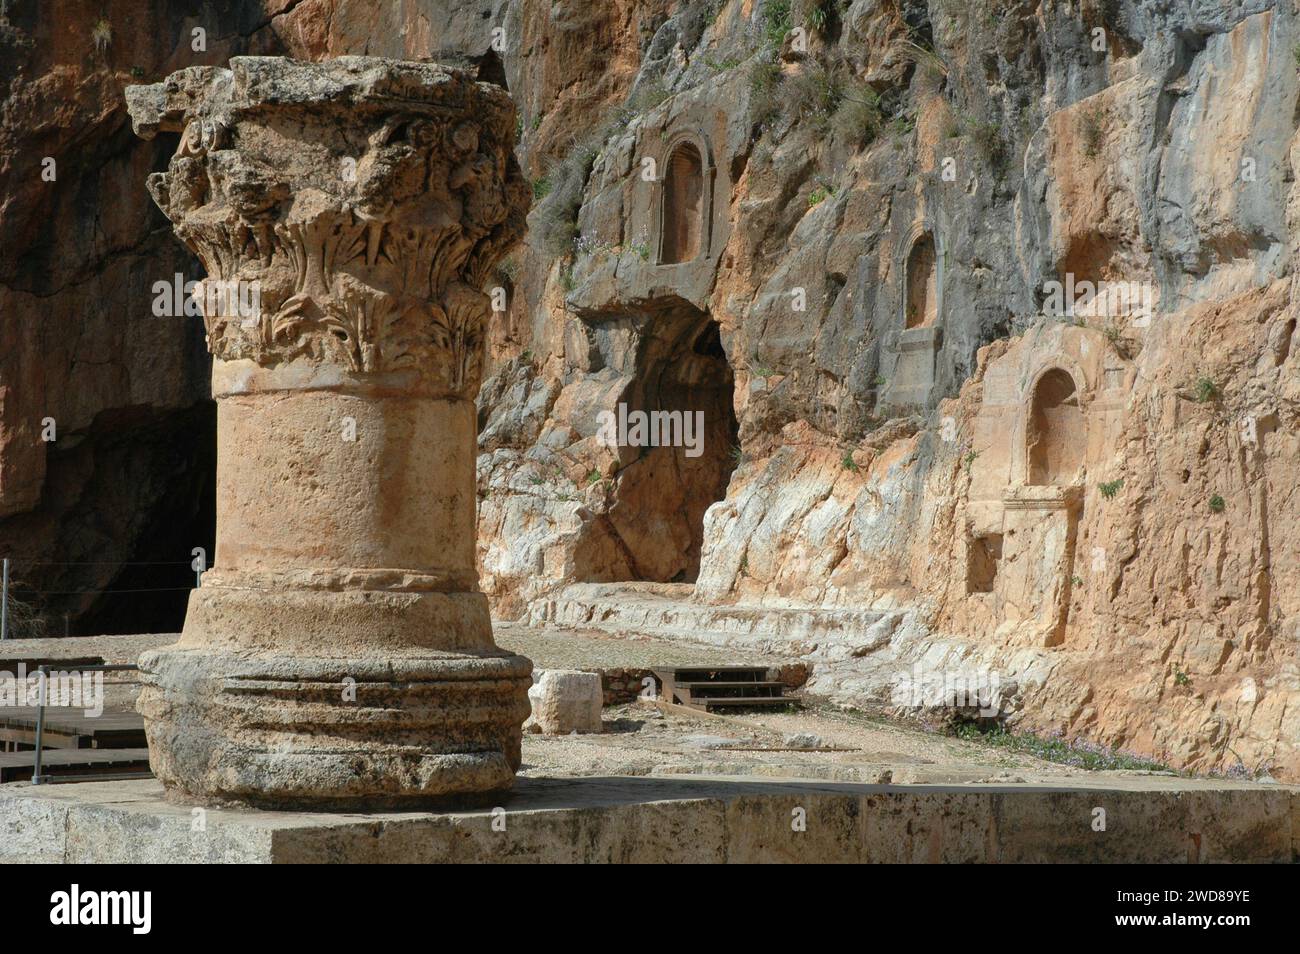 Marble columns and other archeological remains of an ancient city in northern Israel at the foot of Mount Hermon known as Banias or Banyas. Stock Photo